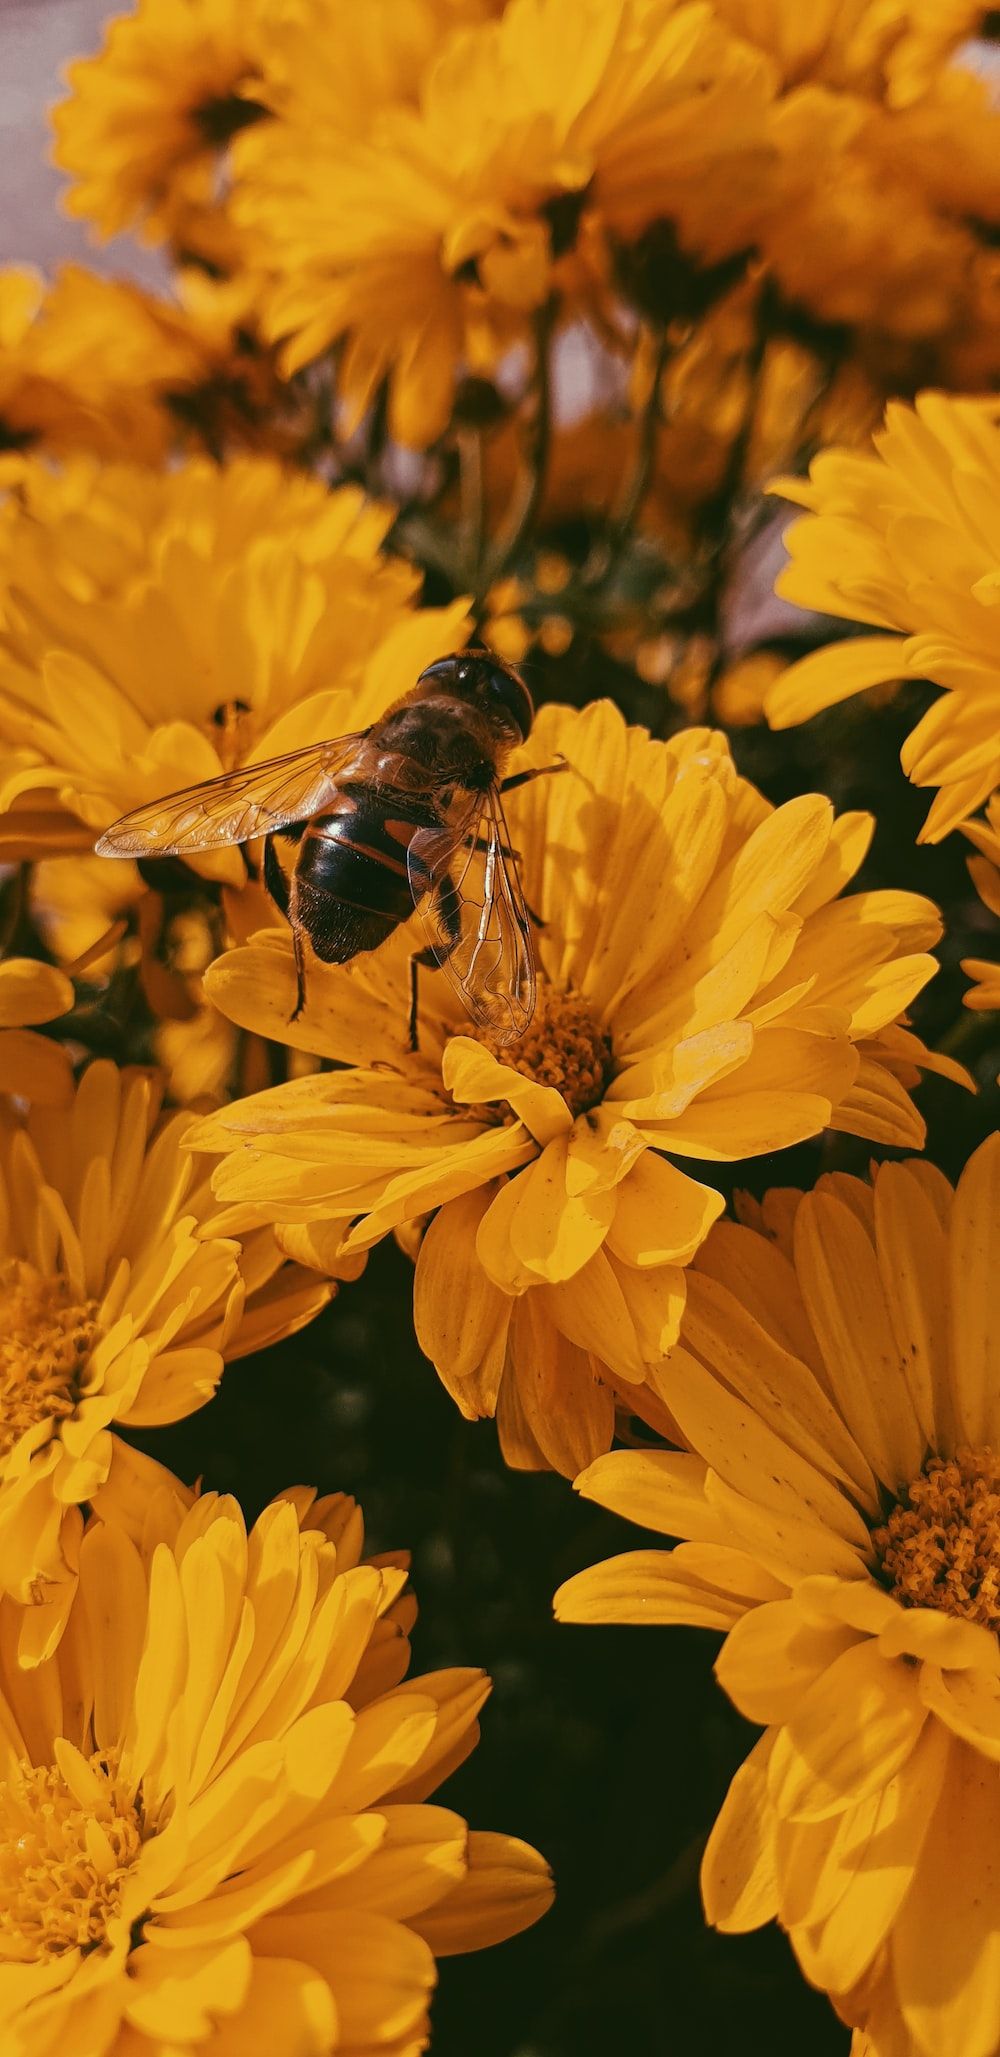 Honey Bee Picture. Download Free Image